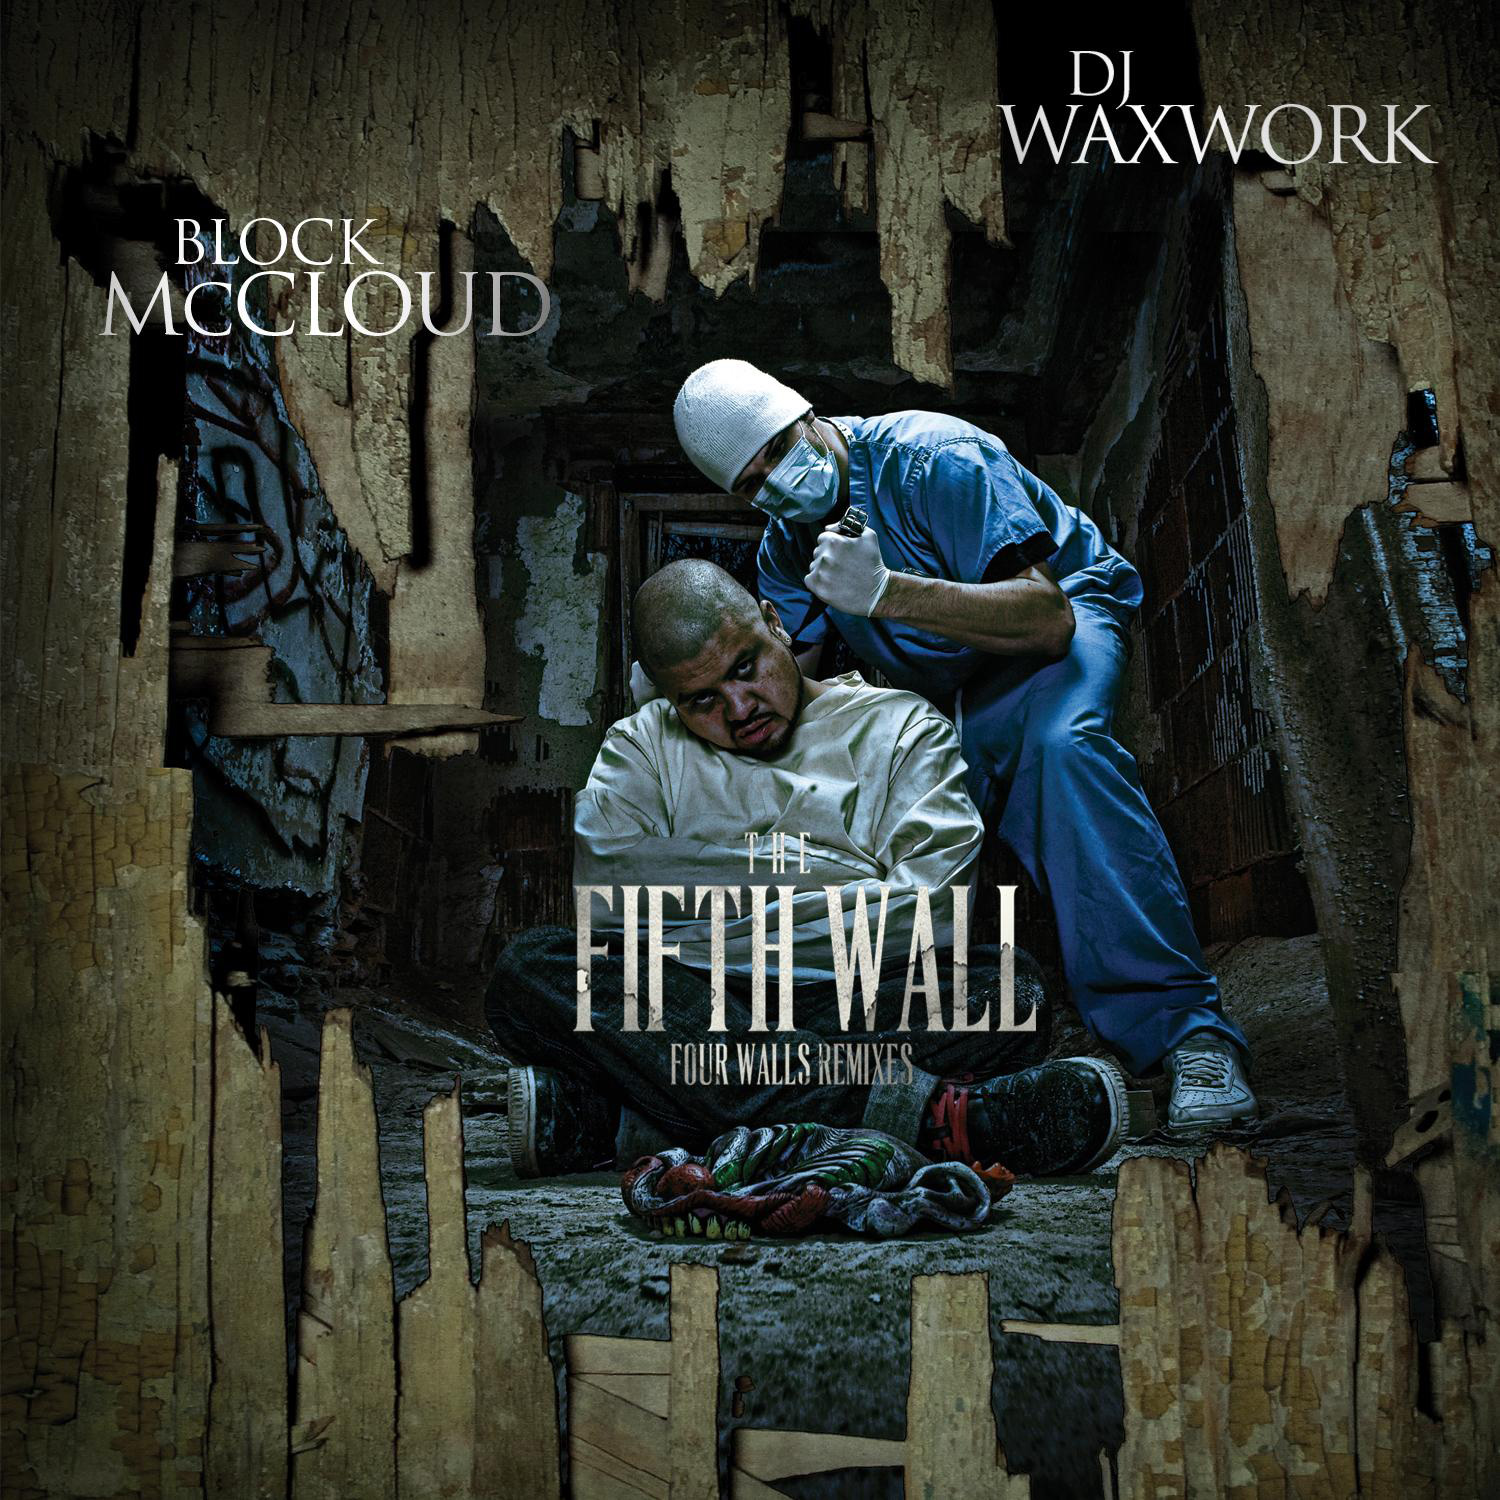 News Added Jan 08, 2014 Underground legend and CEO of his brand new label, Disturbia Music Group, Block McCloud (Brooklyn Academy, AOTP, Gods of Chaos) announces the release of his first solo album, 'Four Walls', to be re-released Oct. 31st, 2013 in conjunction with the release of "The Fifth Wall : Four Walls Remixes" featuring […]